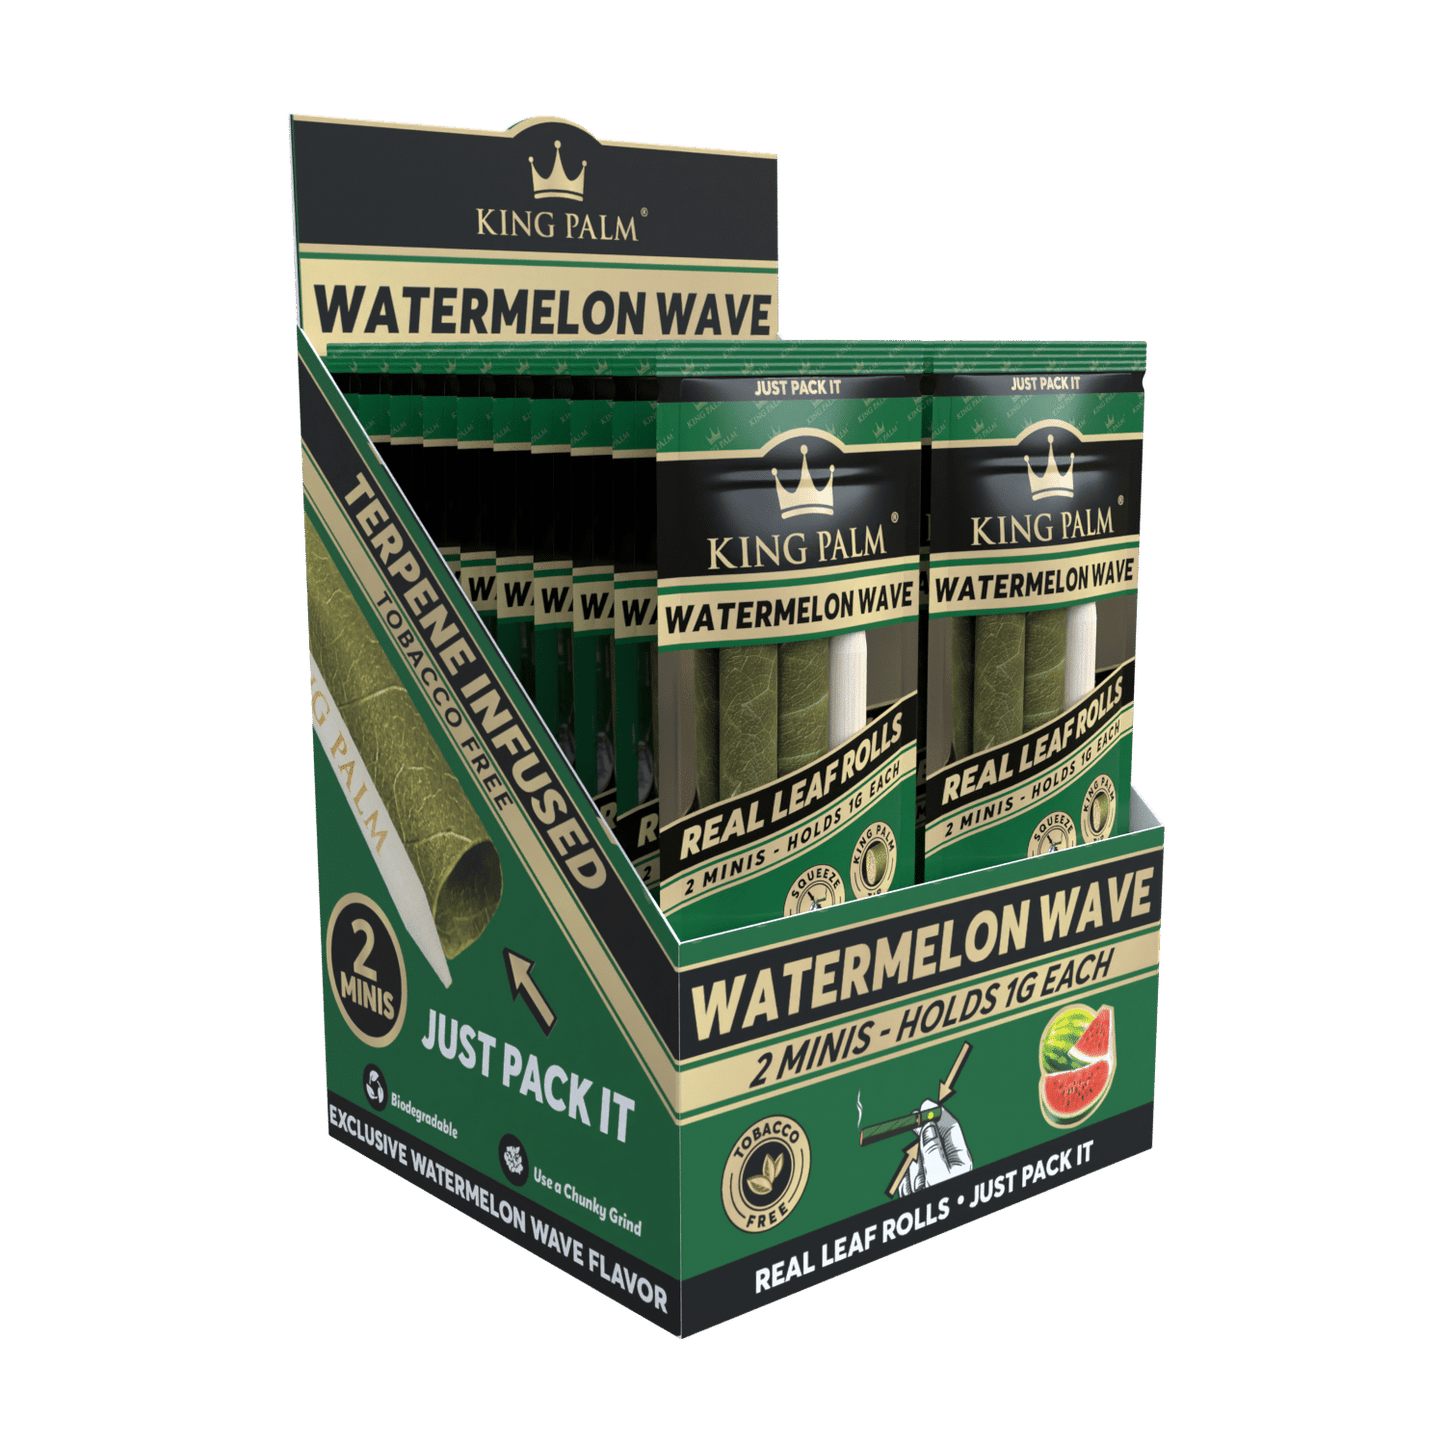 King Palm Real Leaf Rolls | 20-packs 2 minis | Watermelon Wave with Packaging